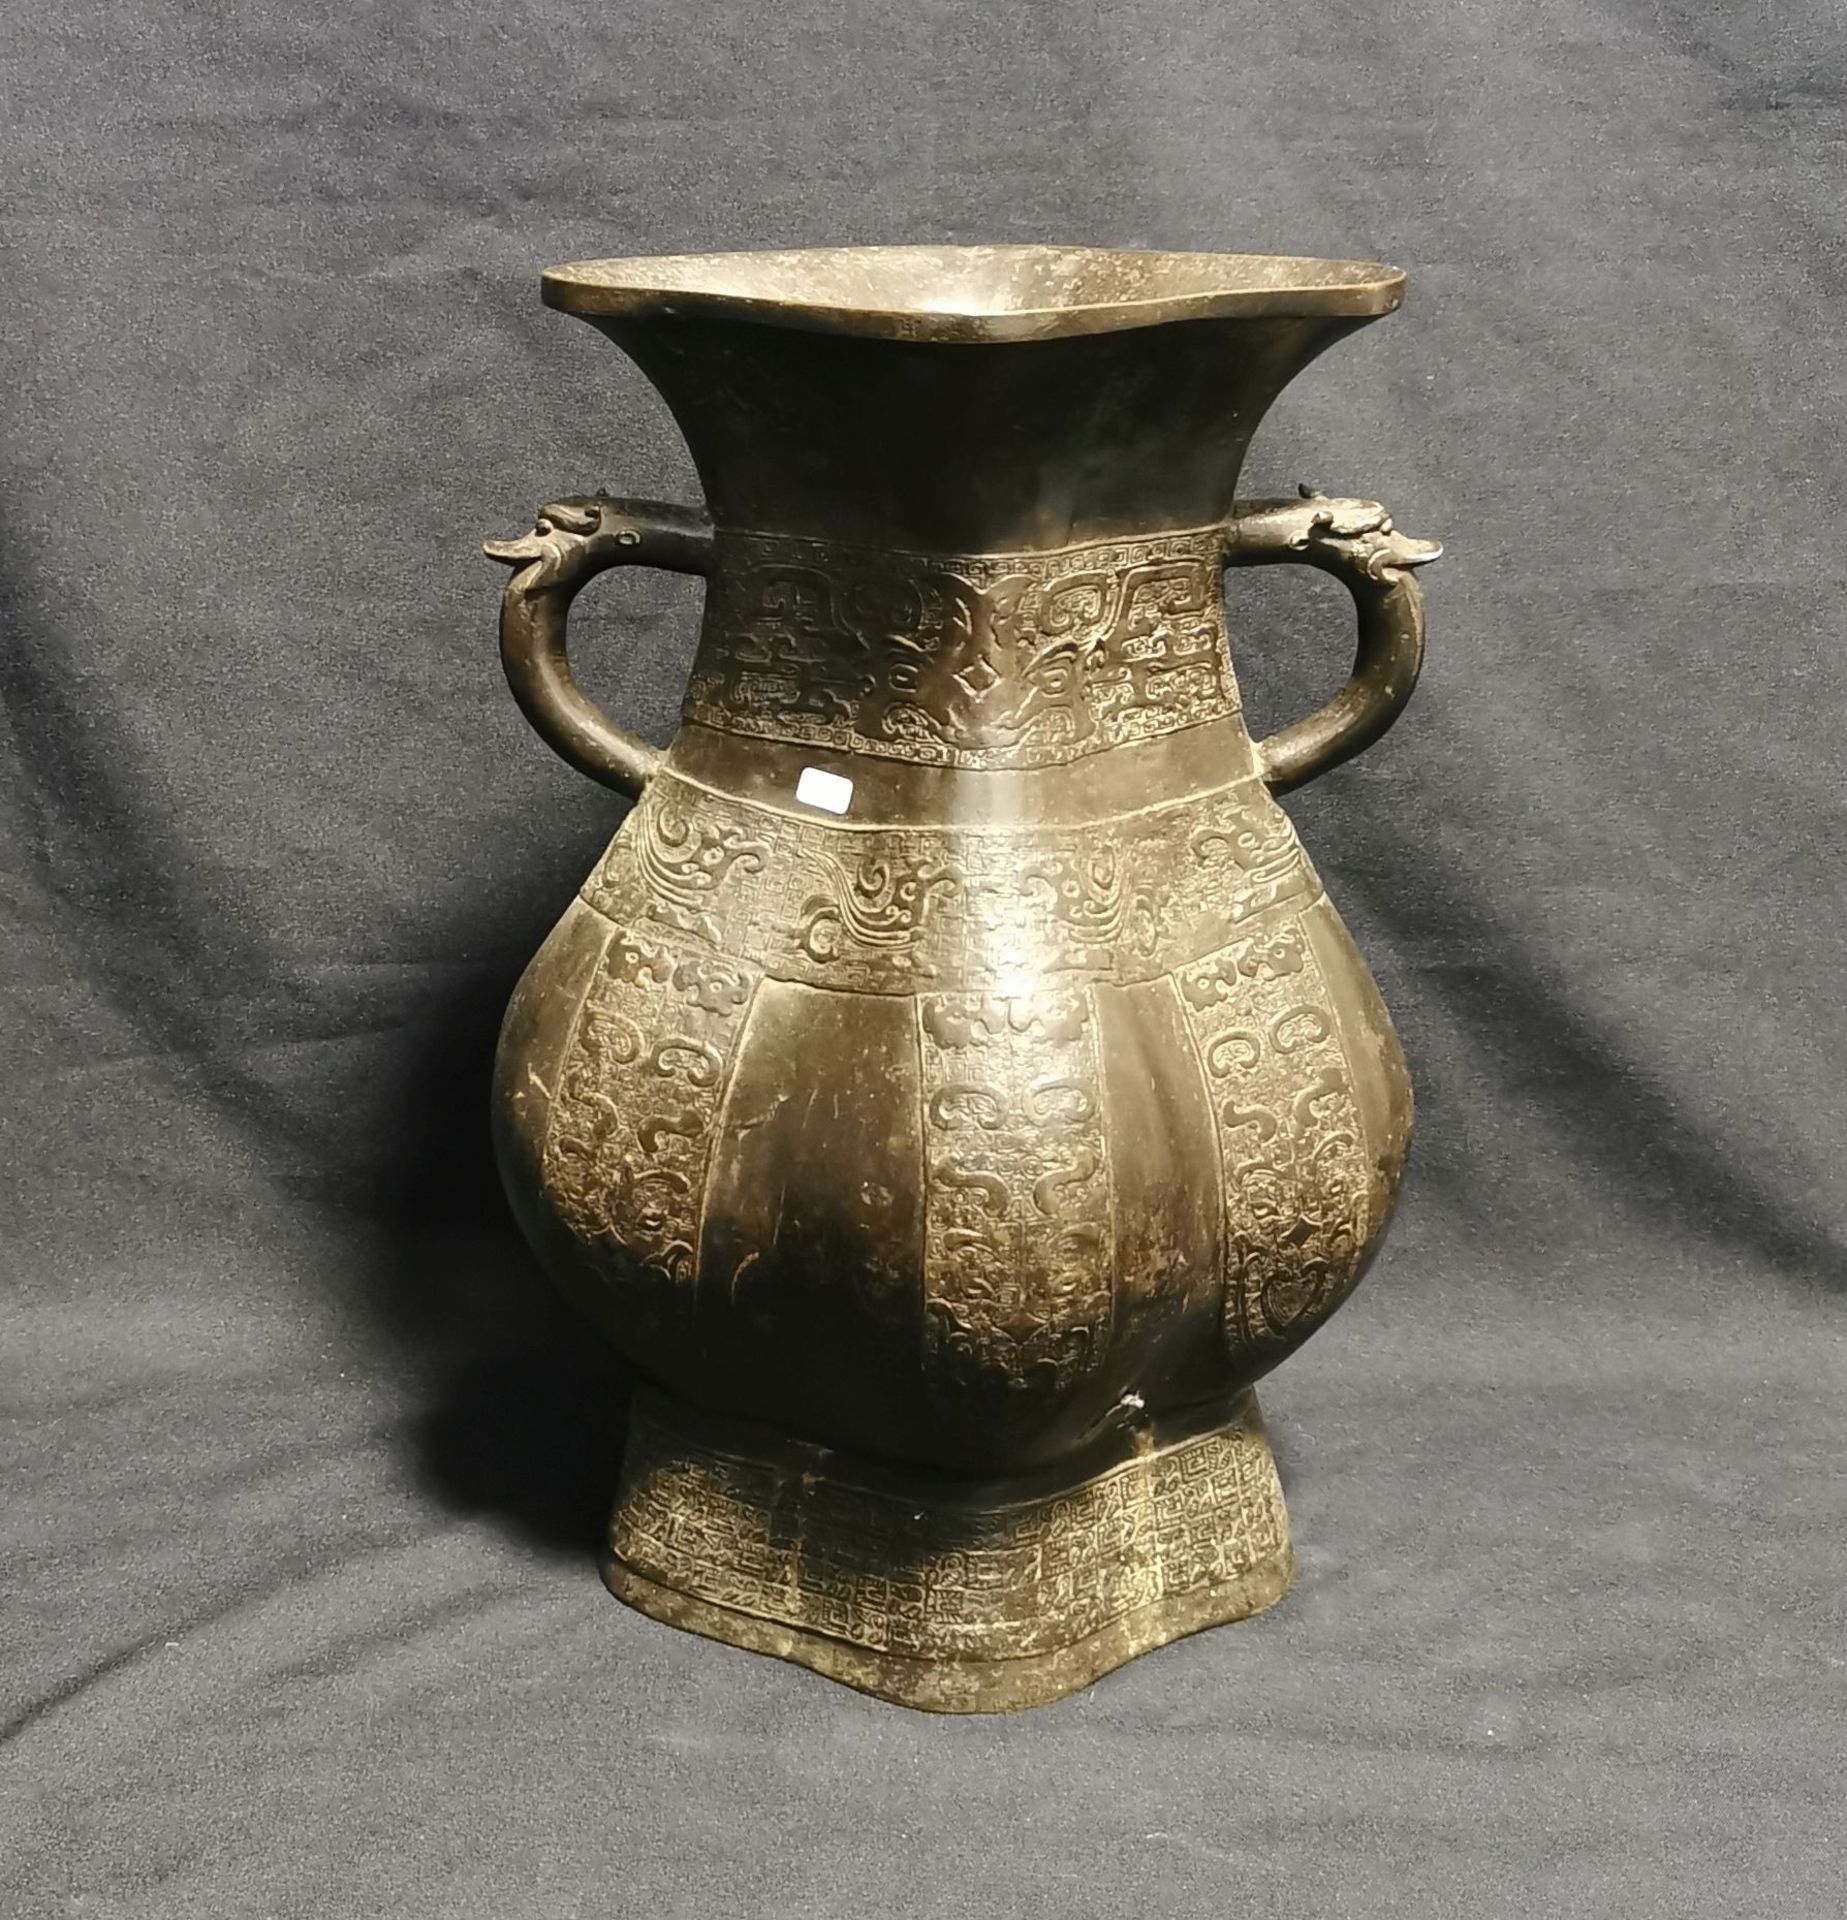 LARGE VASE WITH HANDLE IN ARCHAIC FORM LANGUAGE